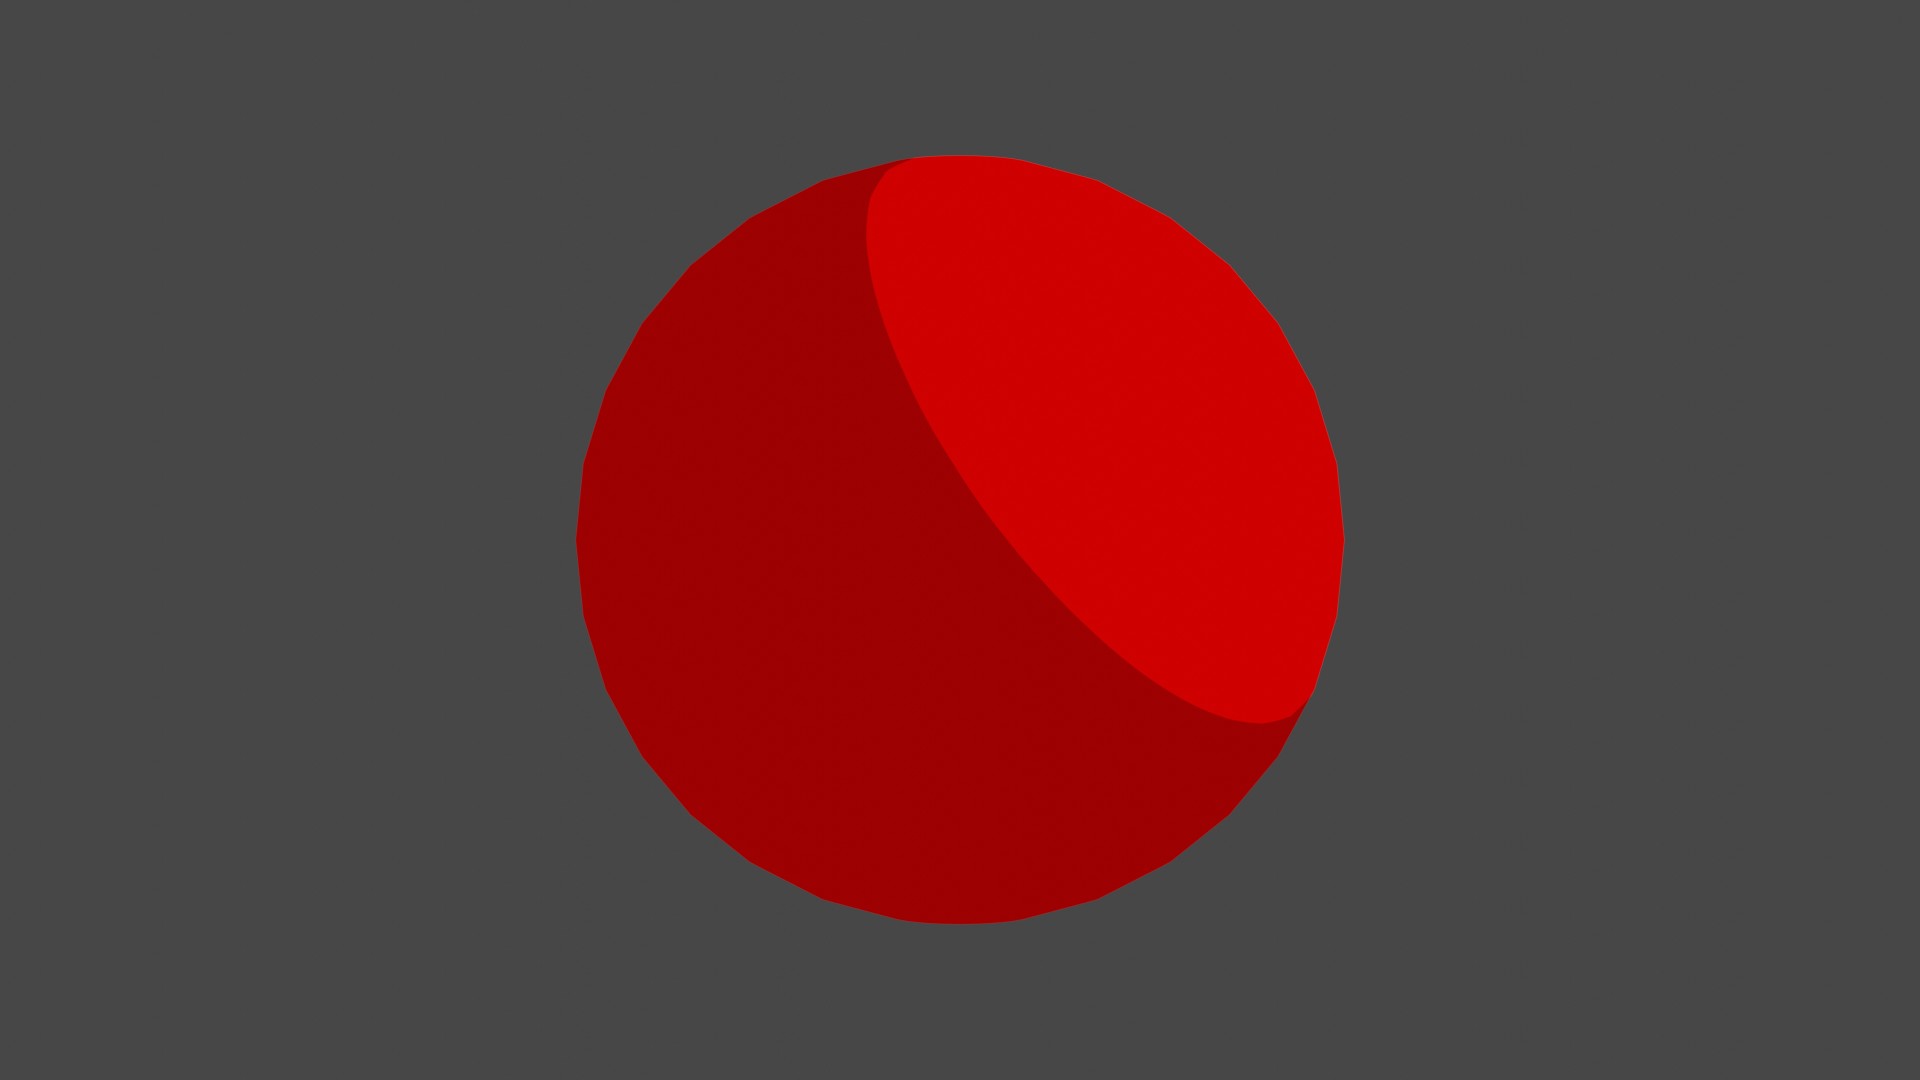 A two-dimensional circle with two tones of red color.